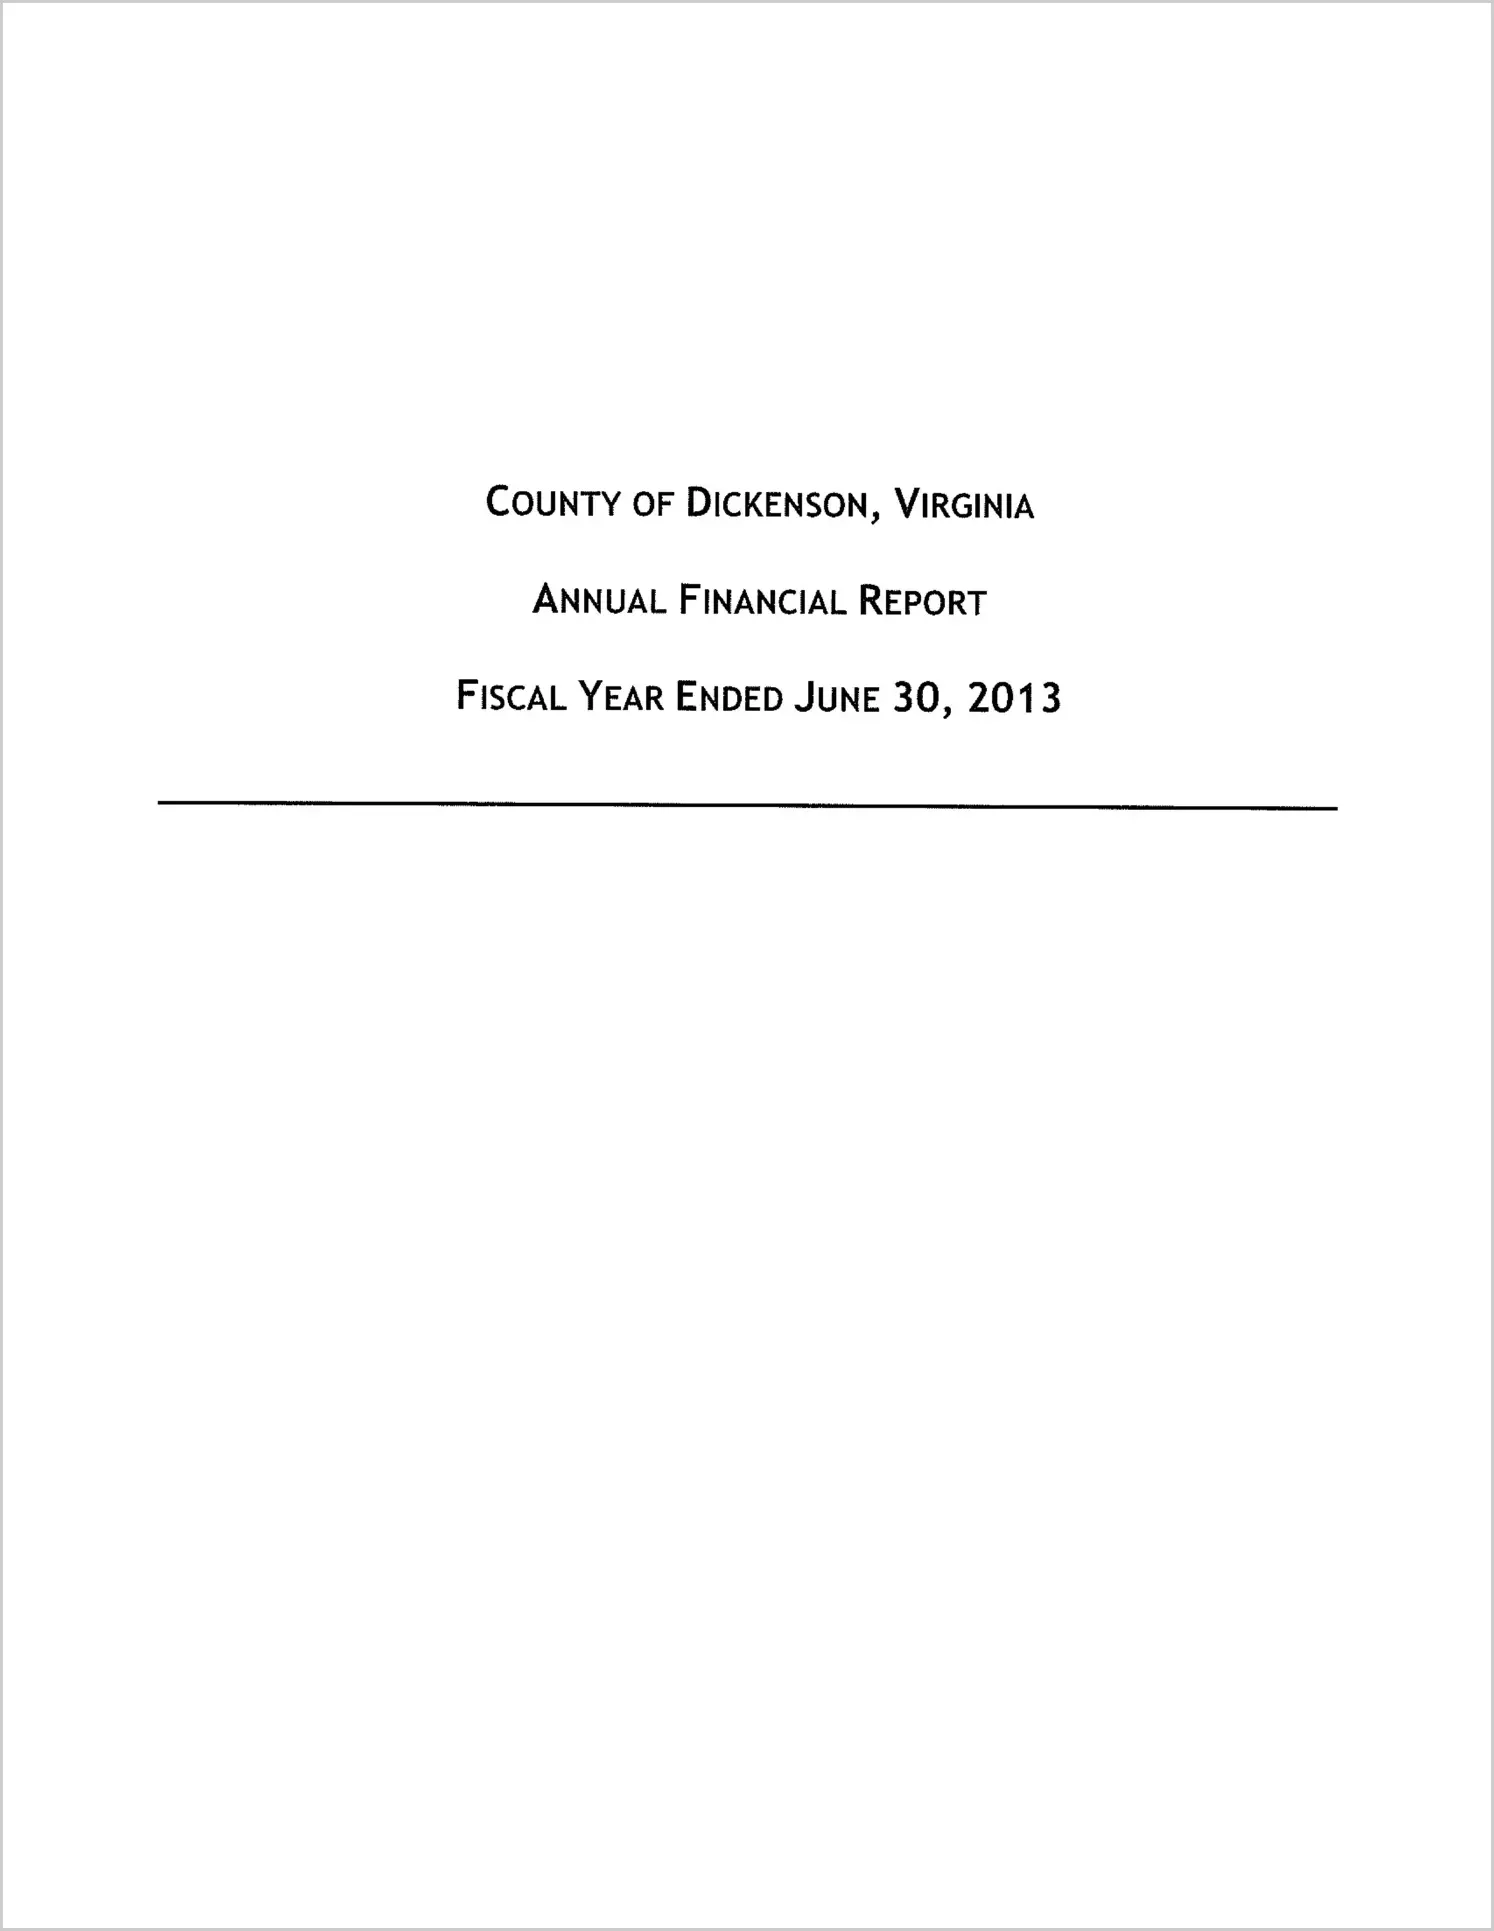 2013 Annual Financial Report for County of Dickenson